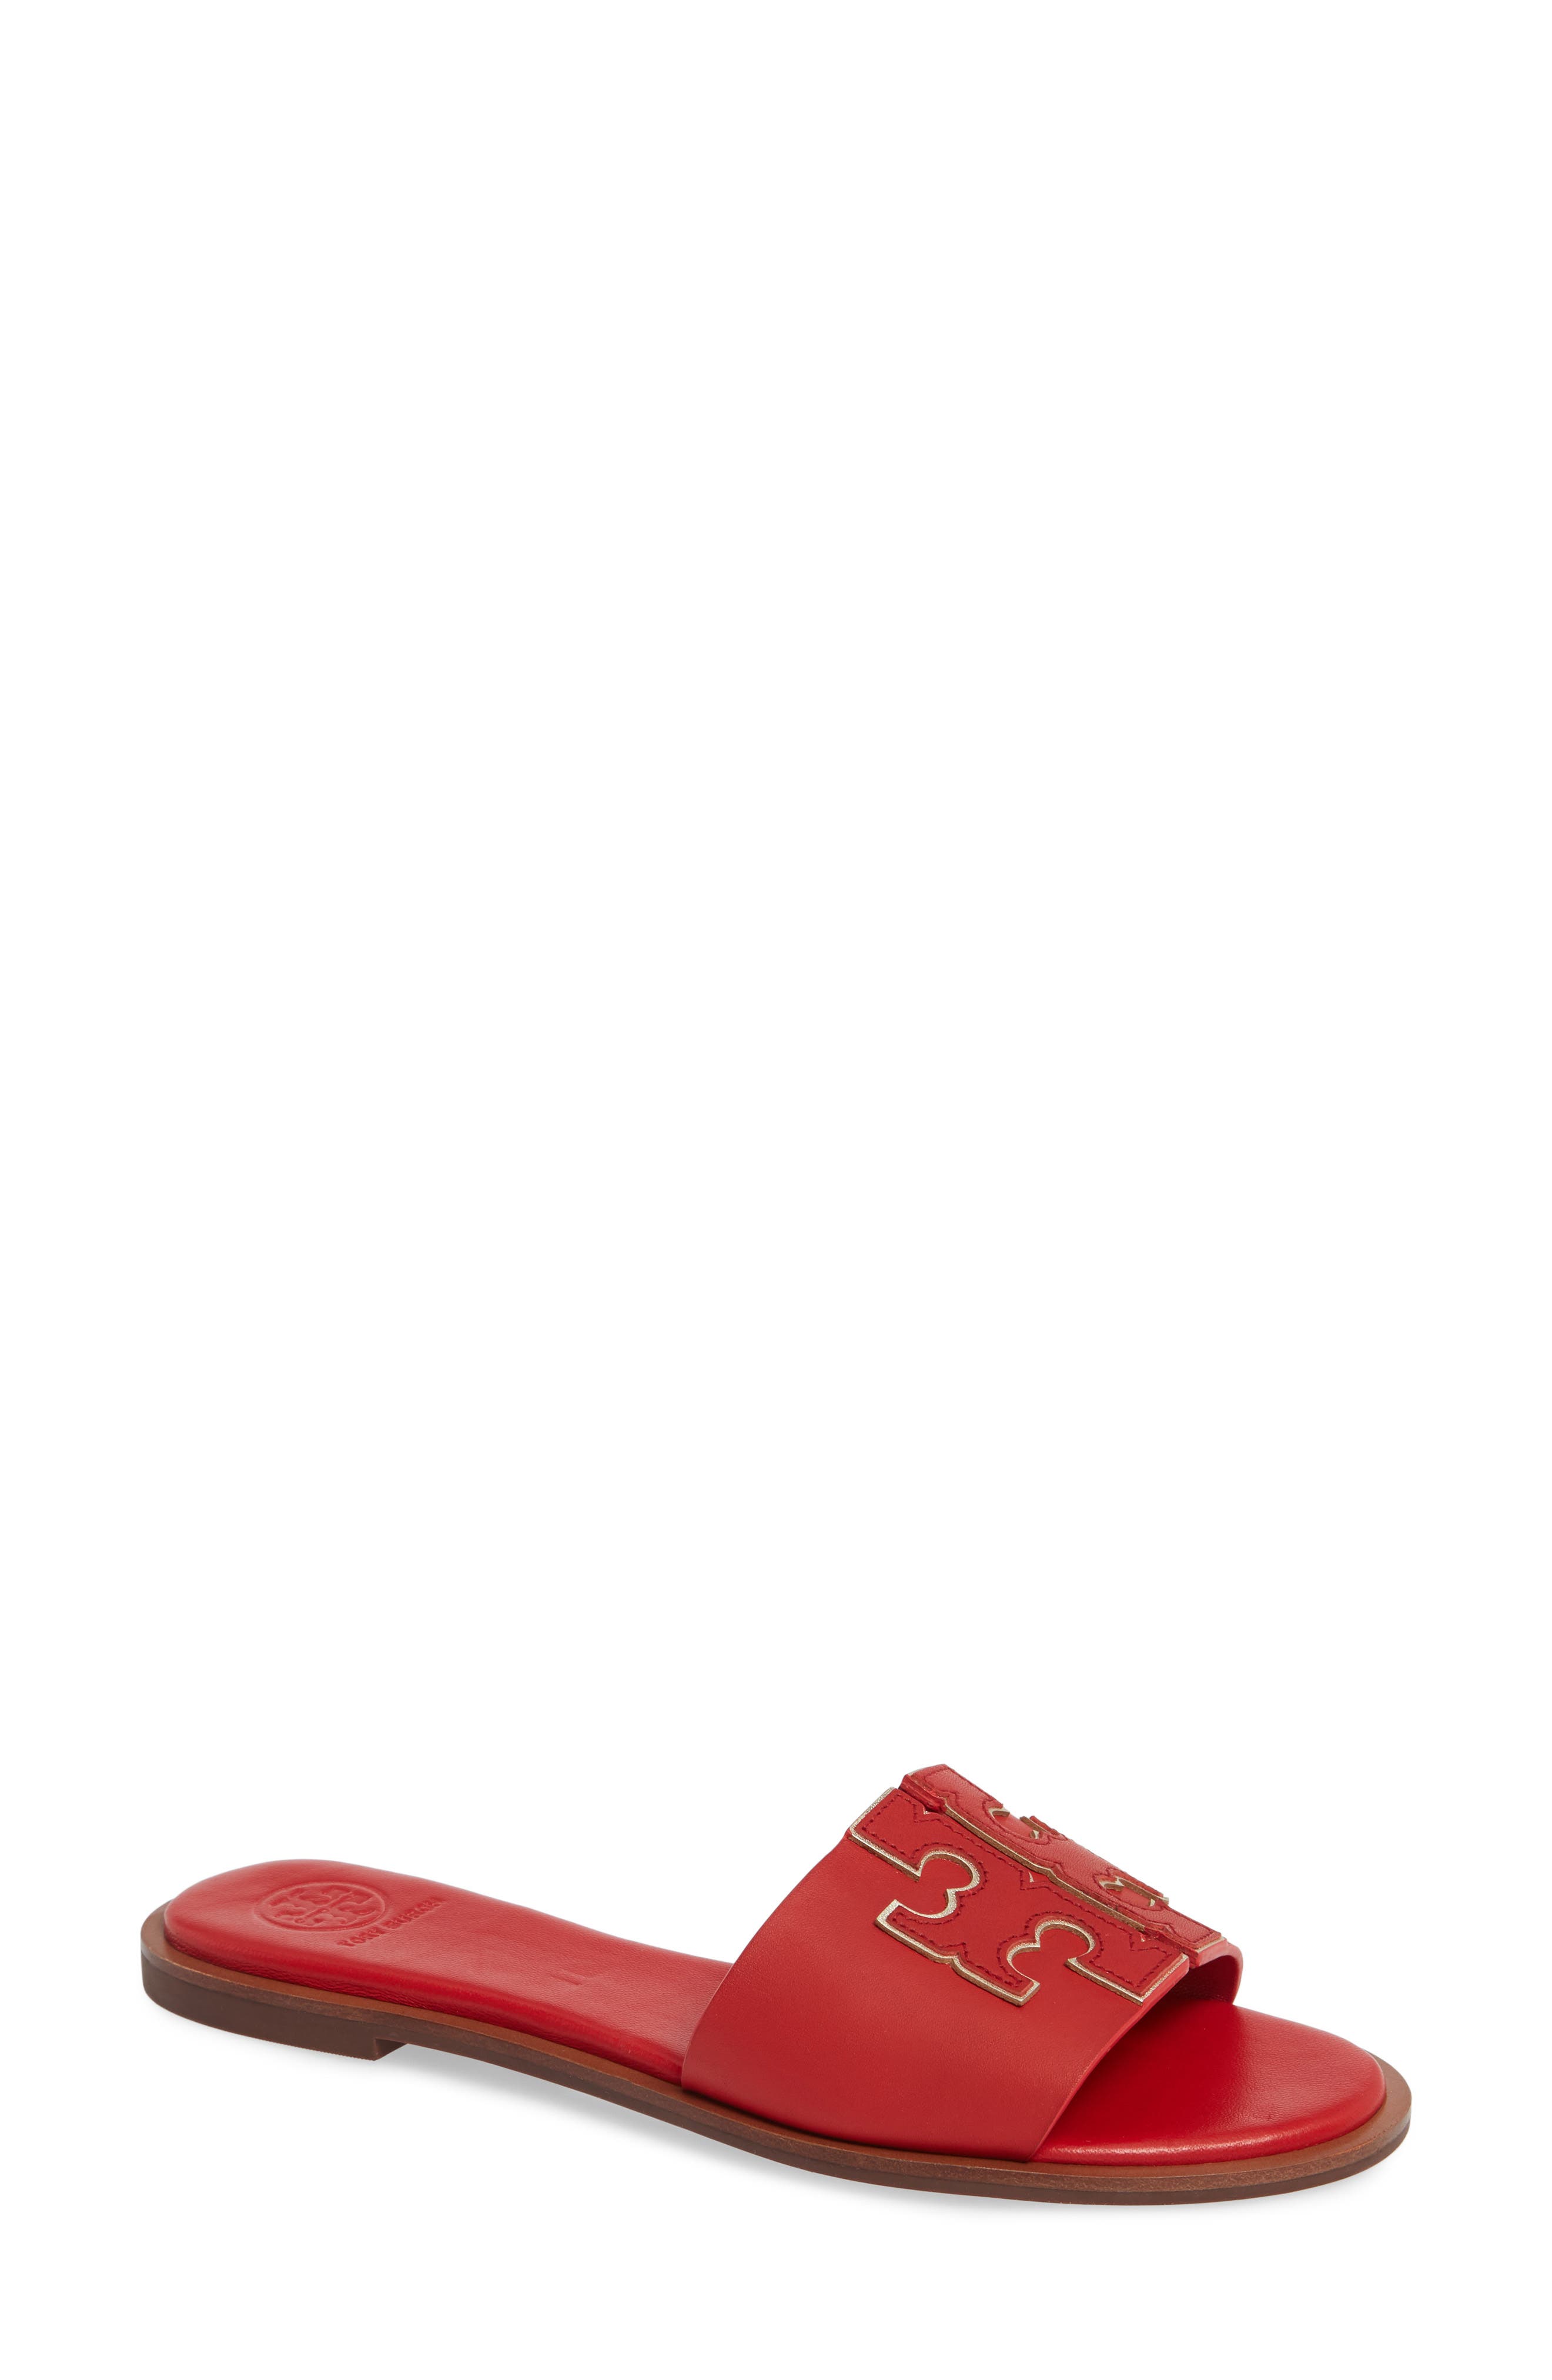 tory burch red slides